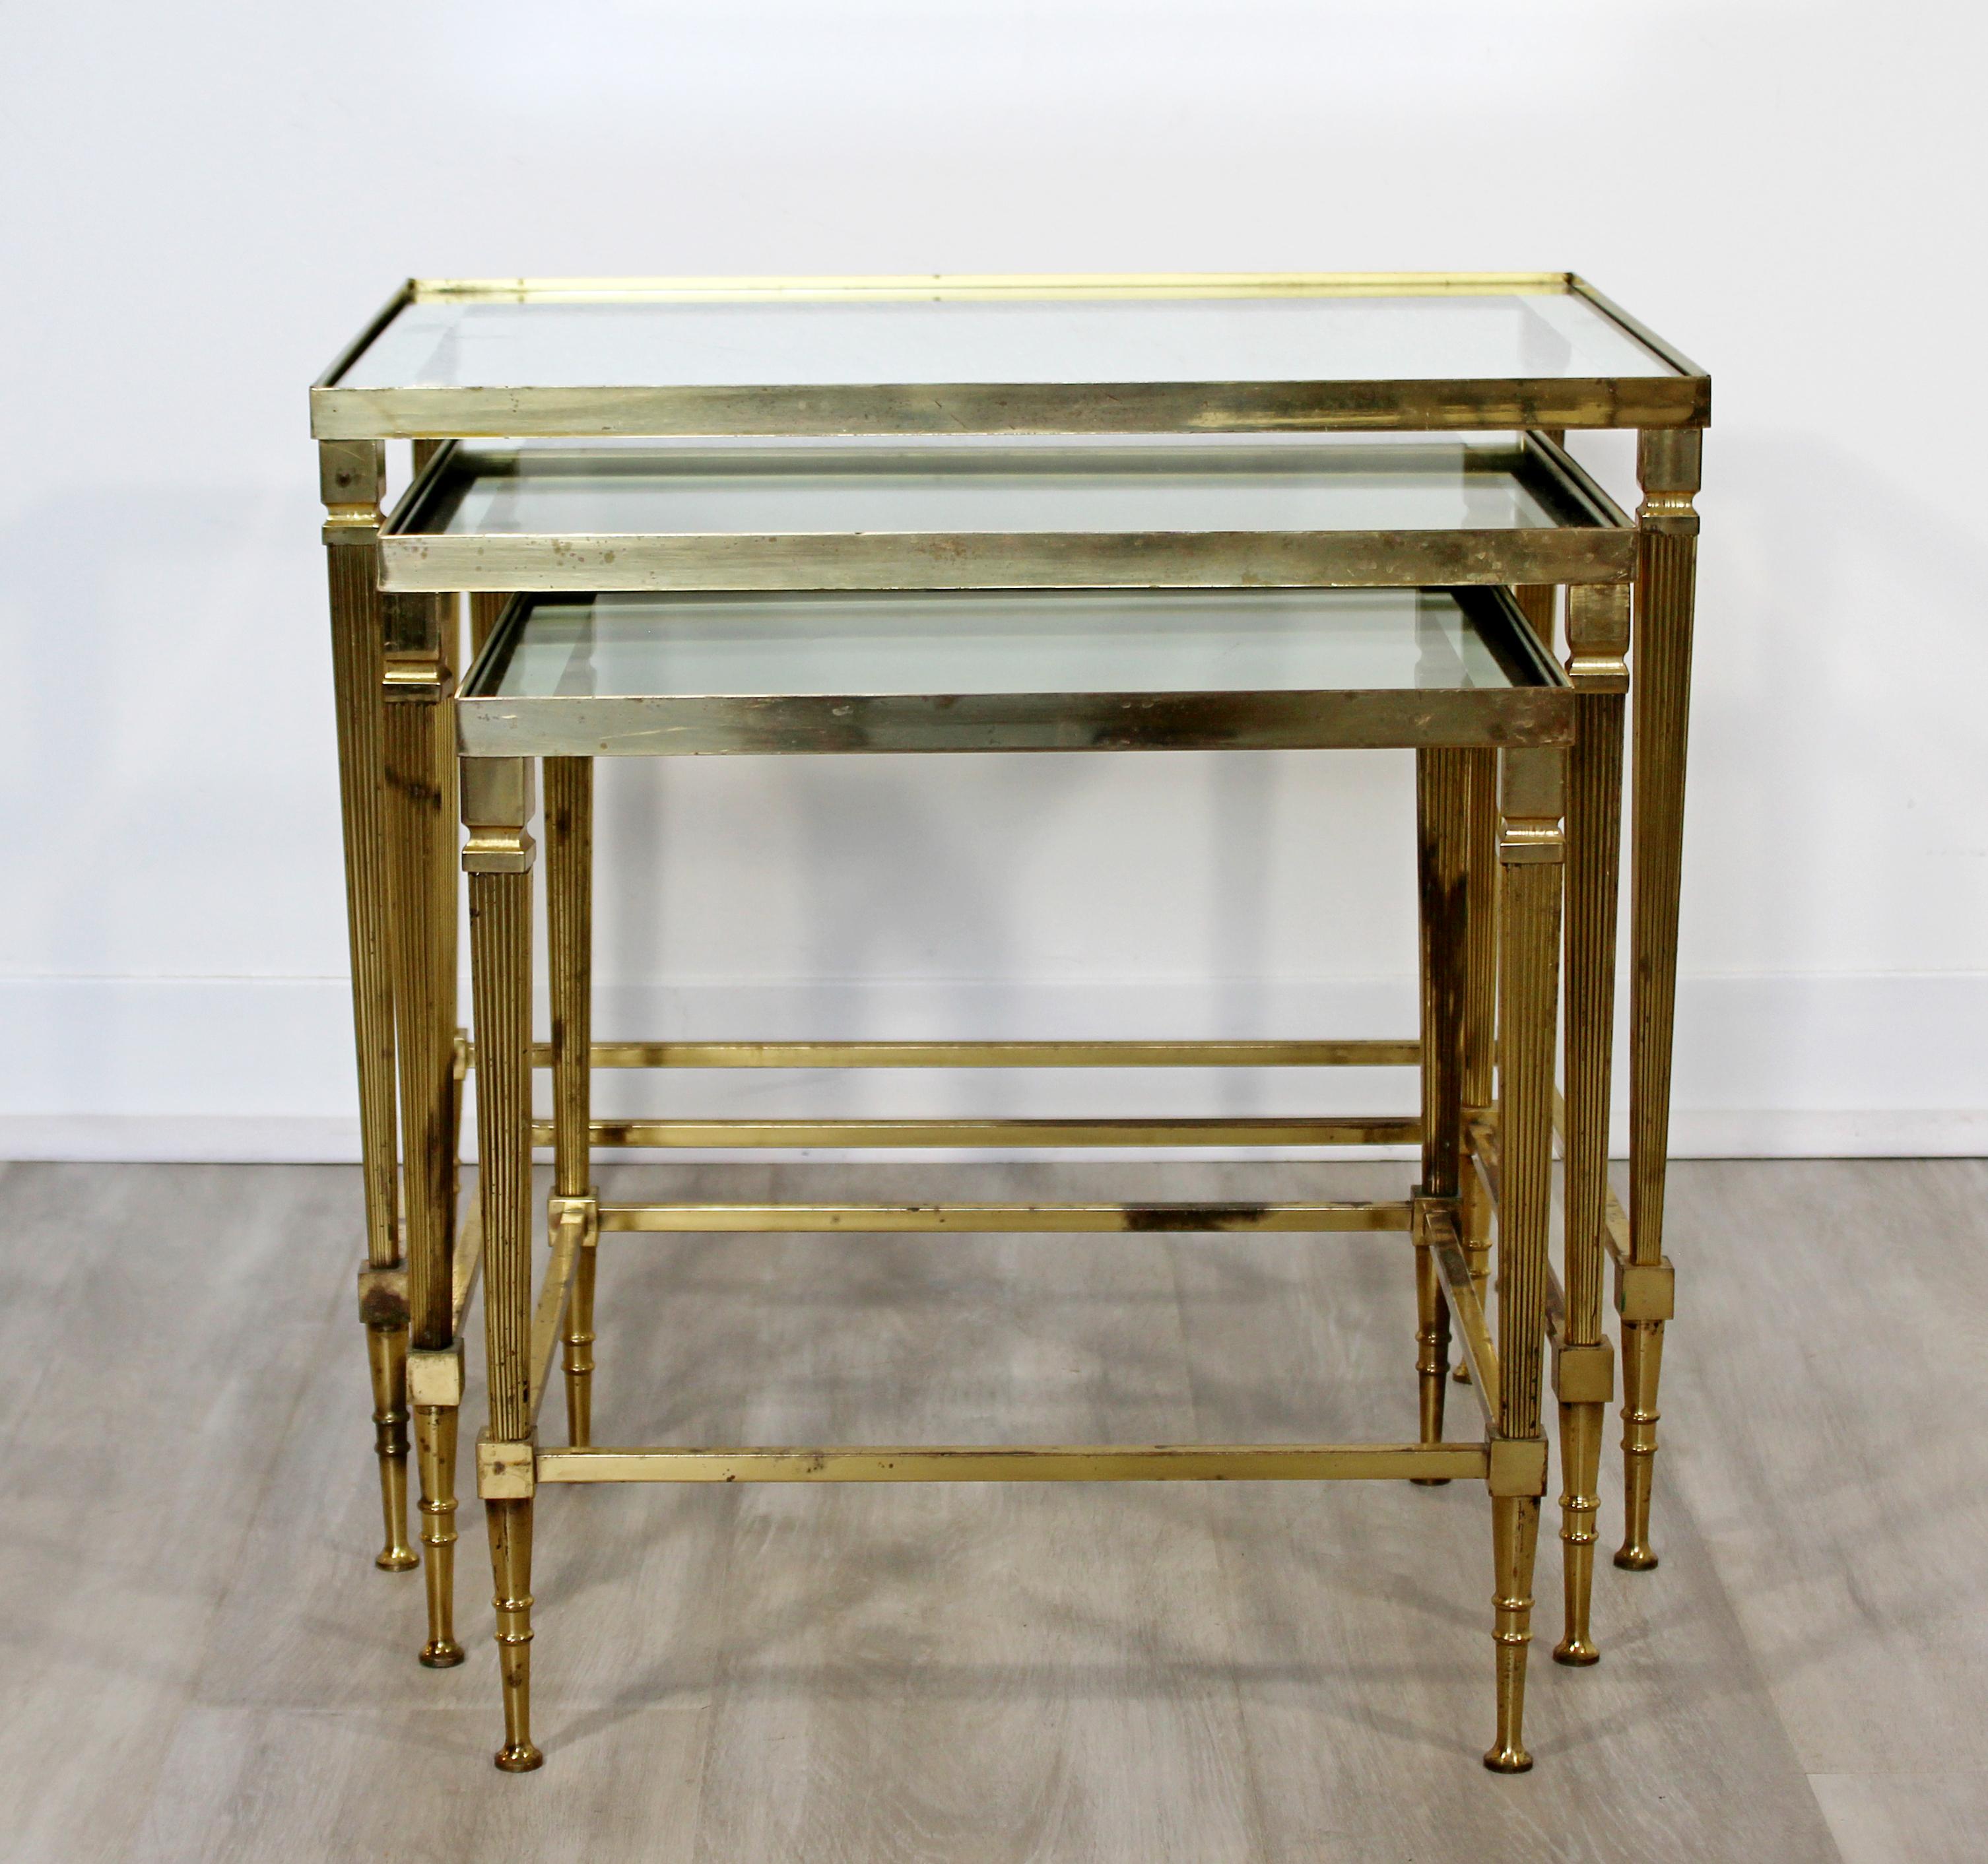 American Mid-Century Modern French Set of 3 Nesting Stacked Side Tables Brass and Glass